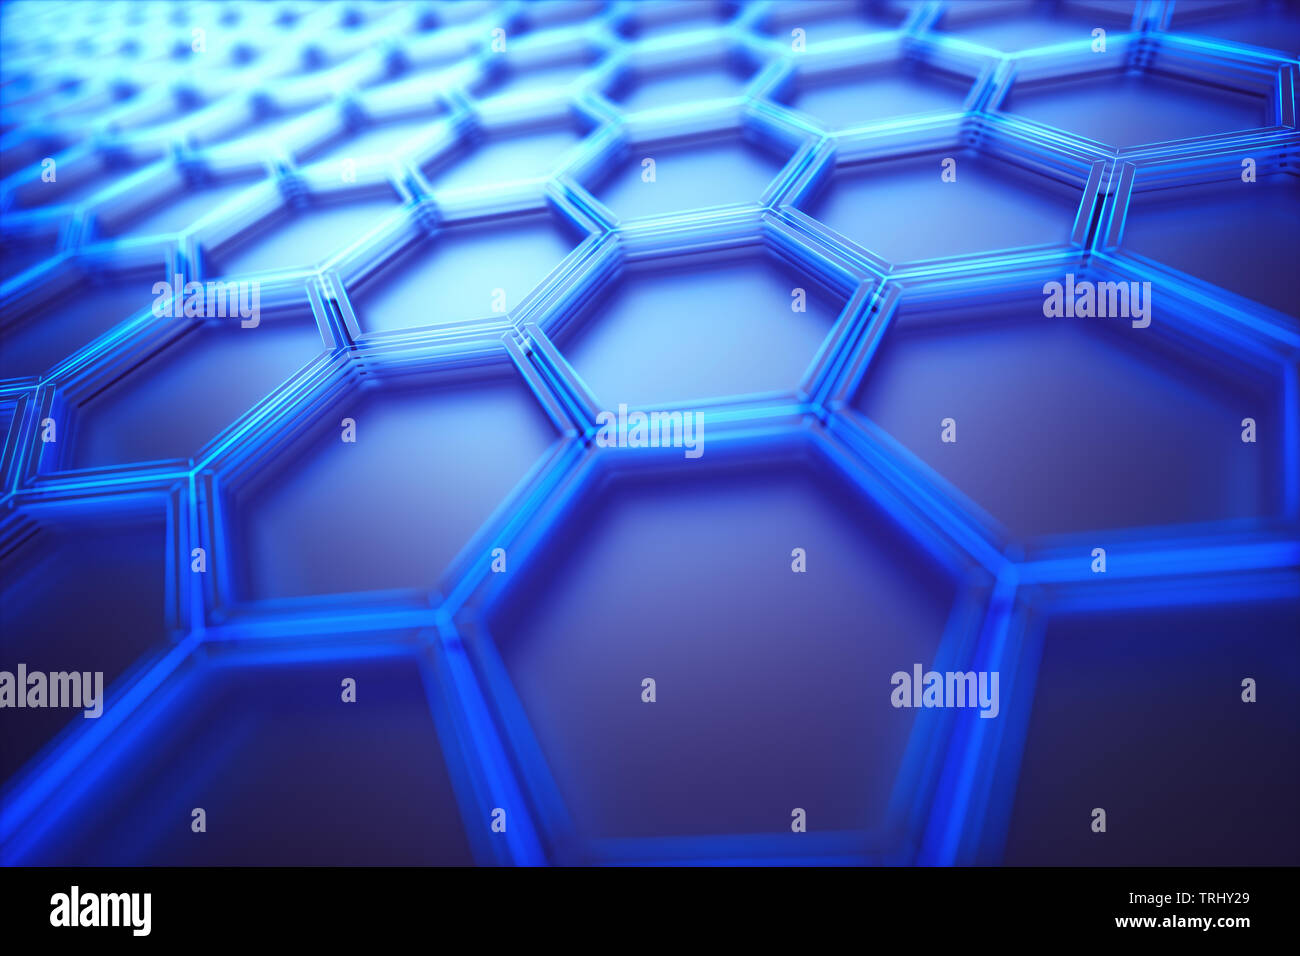 Conceptual abstract image with hexagonal structure connection. 3D illustration background. Stock Photo